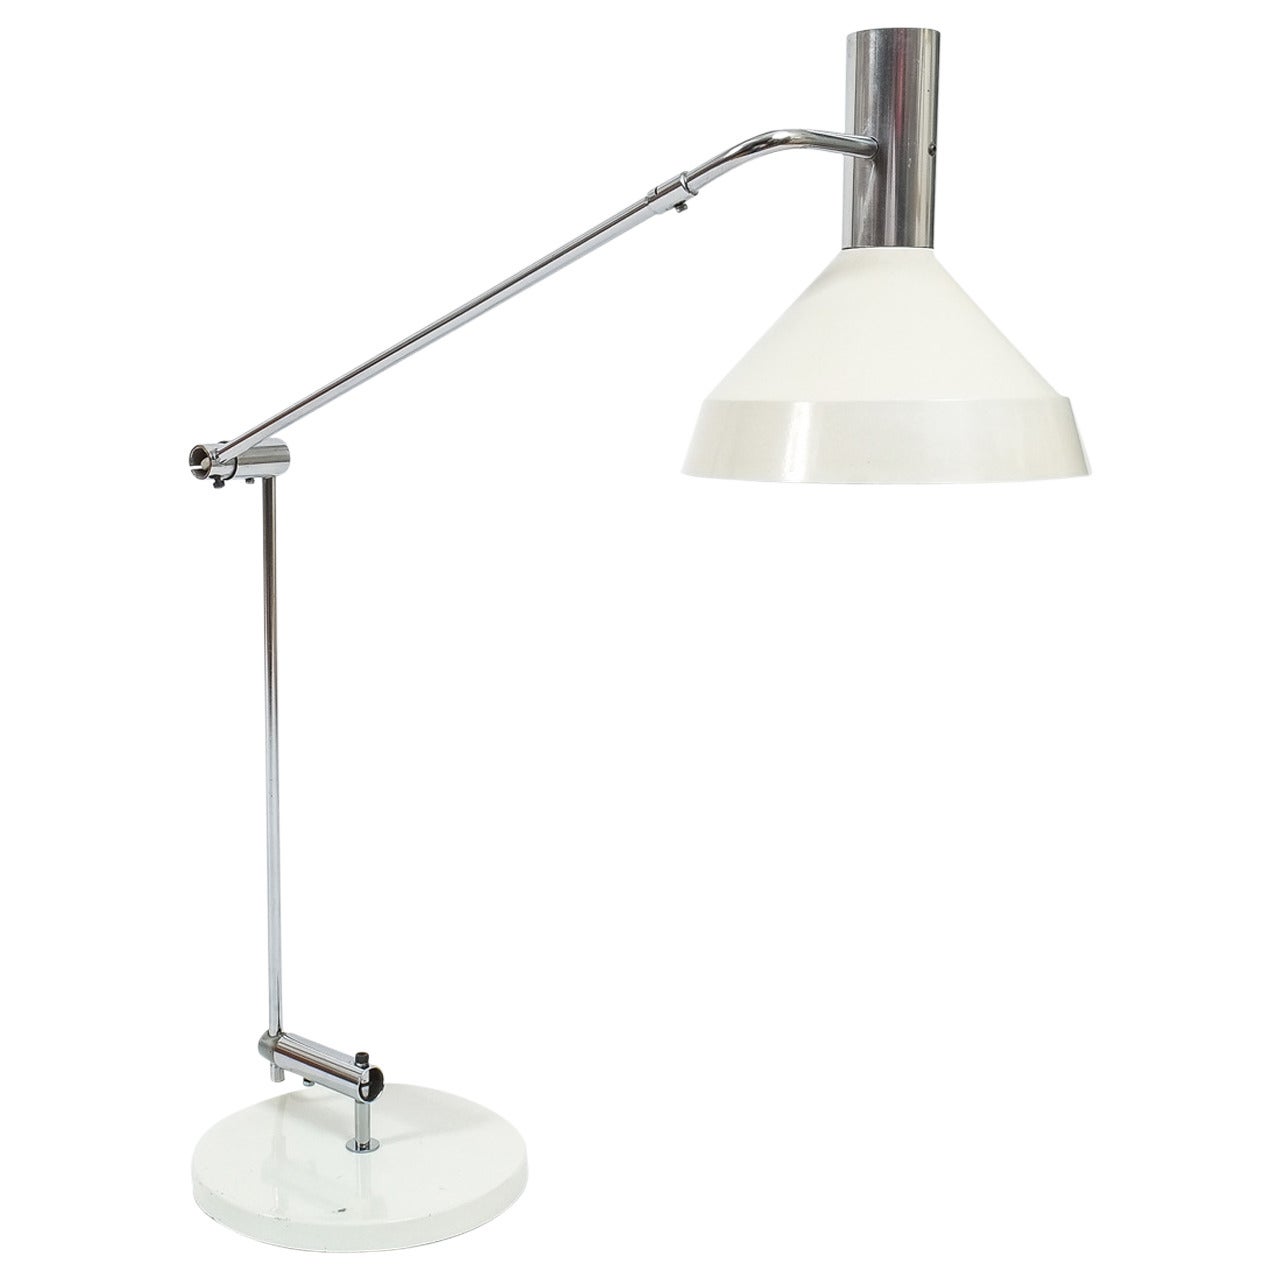 Articluted Swiss Table Lamp by Rico and Rosemary Baltensweiler